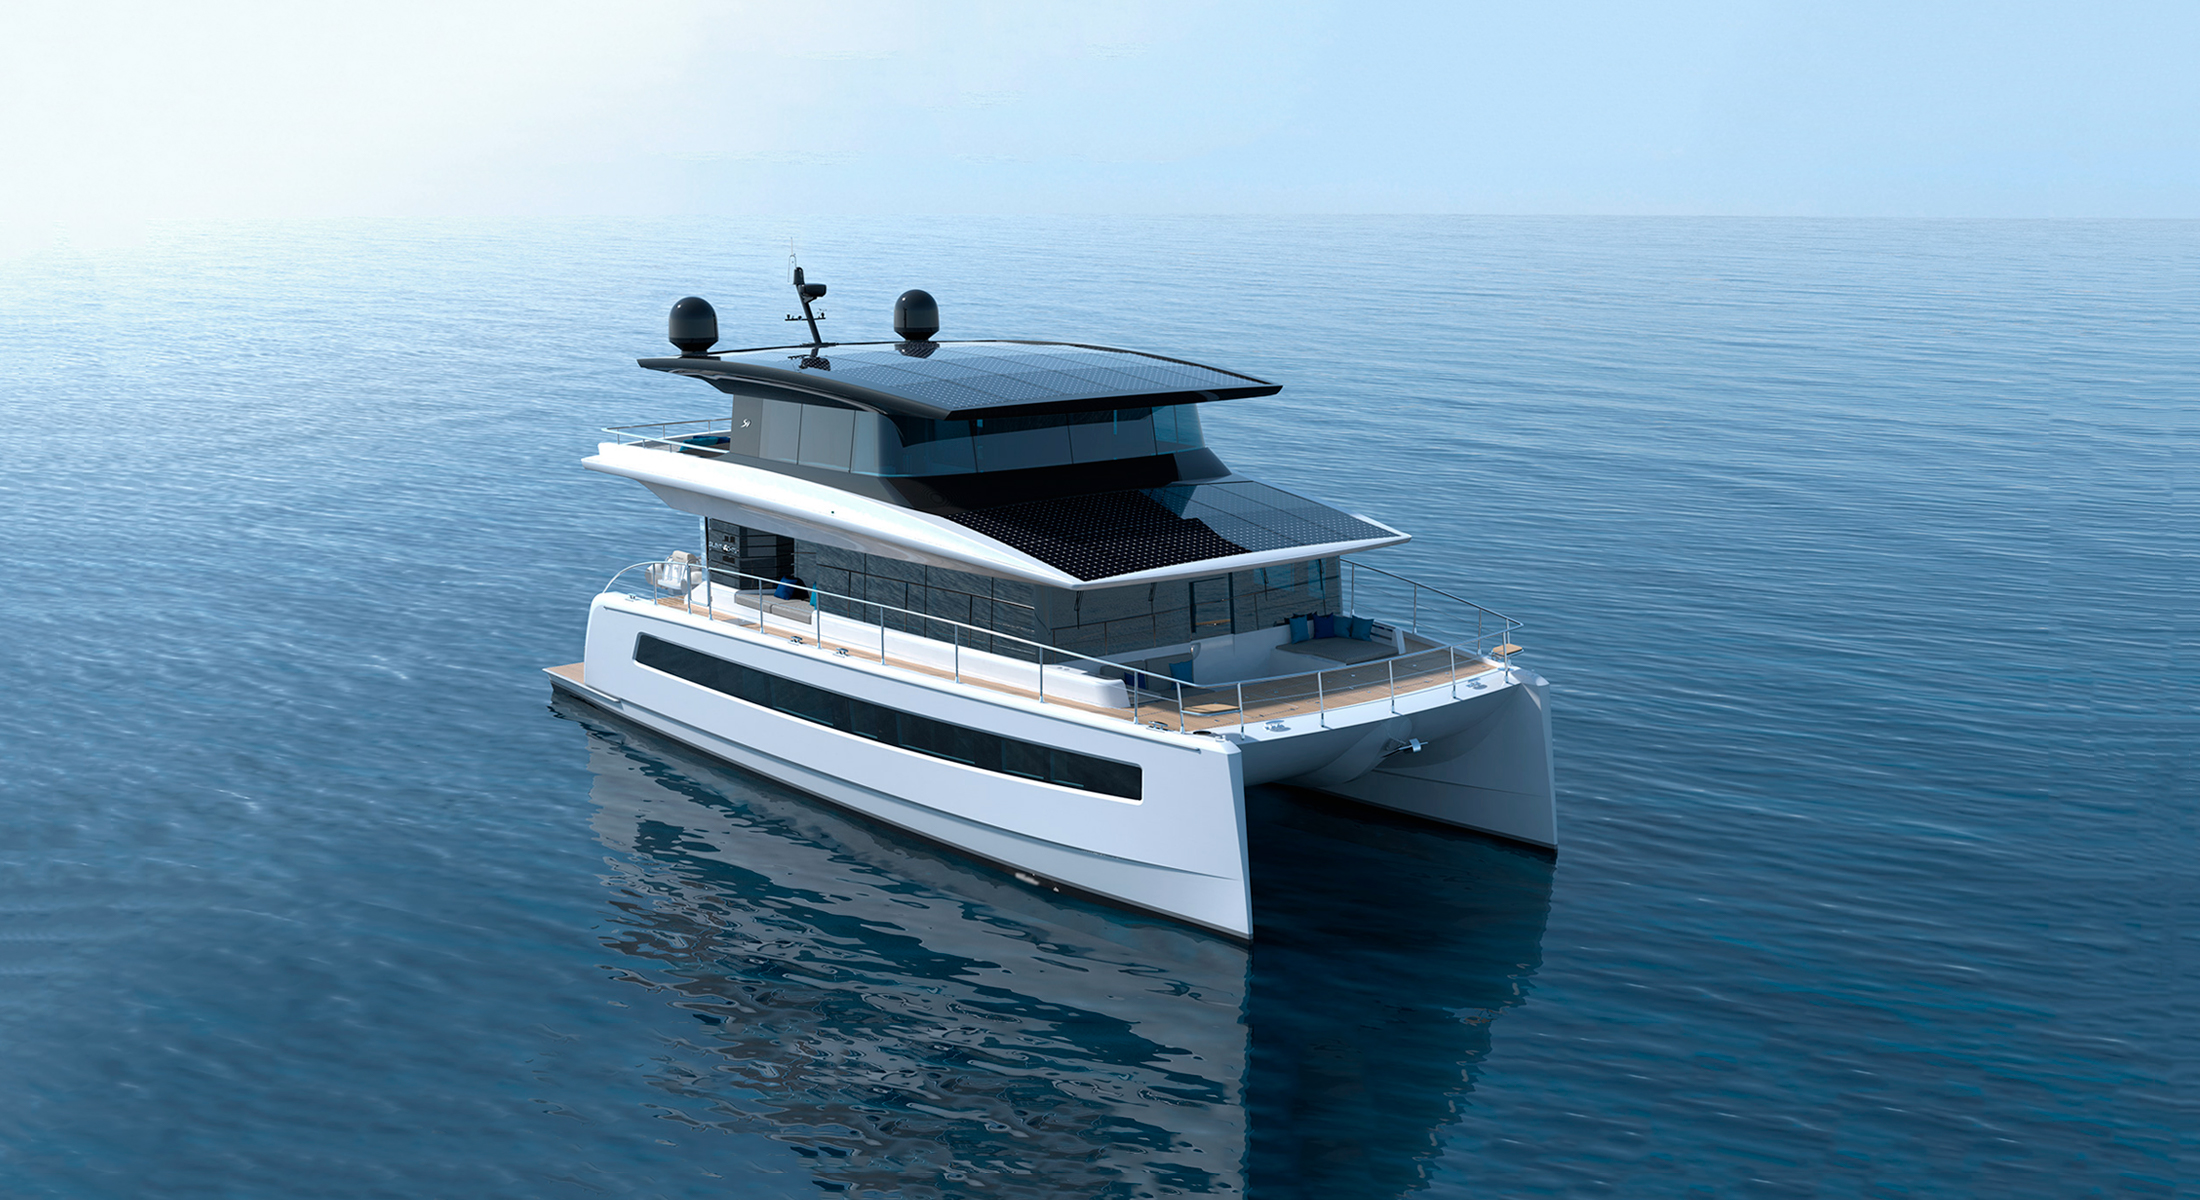 3 deck electric catamaran with solar panels on the roof